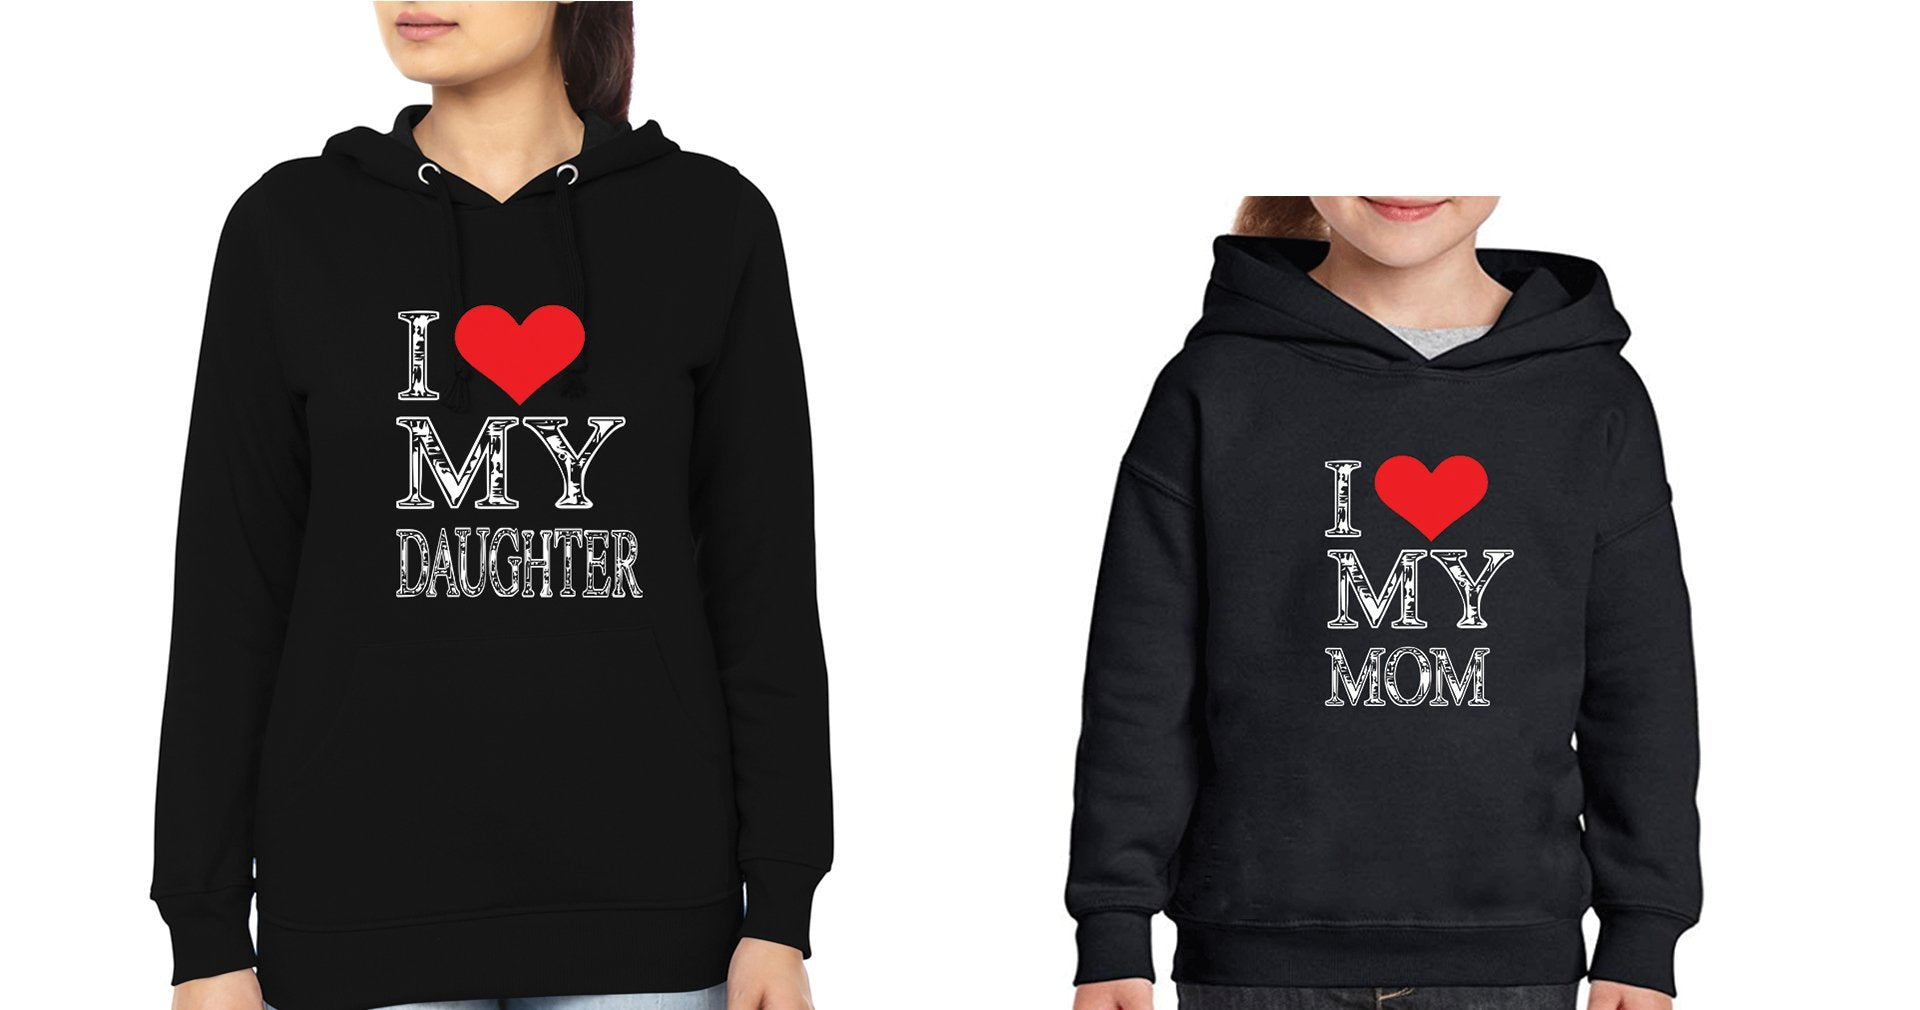 I Love My Daughter I Love My Mom Mother and Daughter Matching Hoodies- FunkyTradition